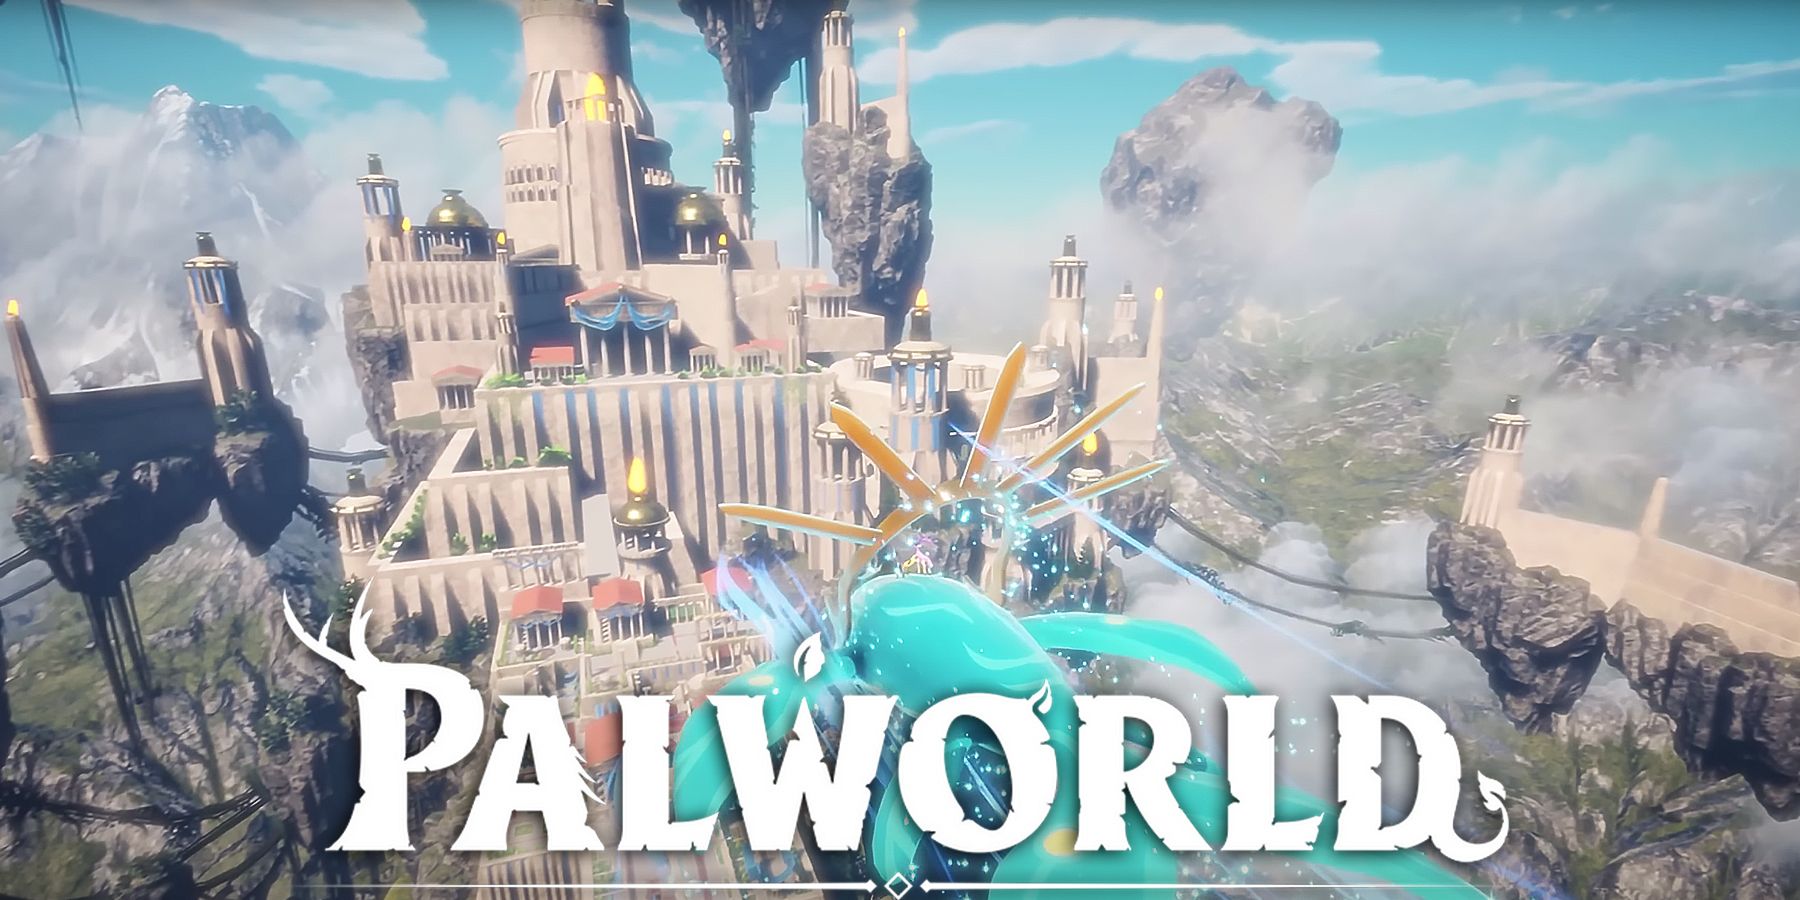 Palworld May 2022 trailer huge city screenshot with white game logo